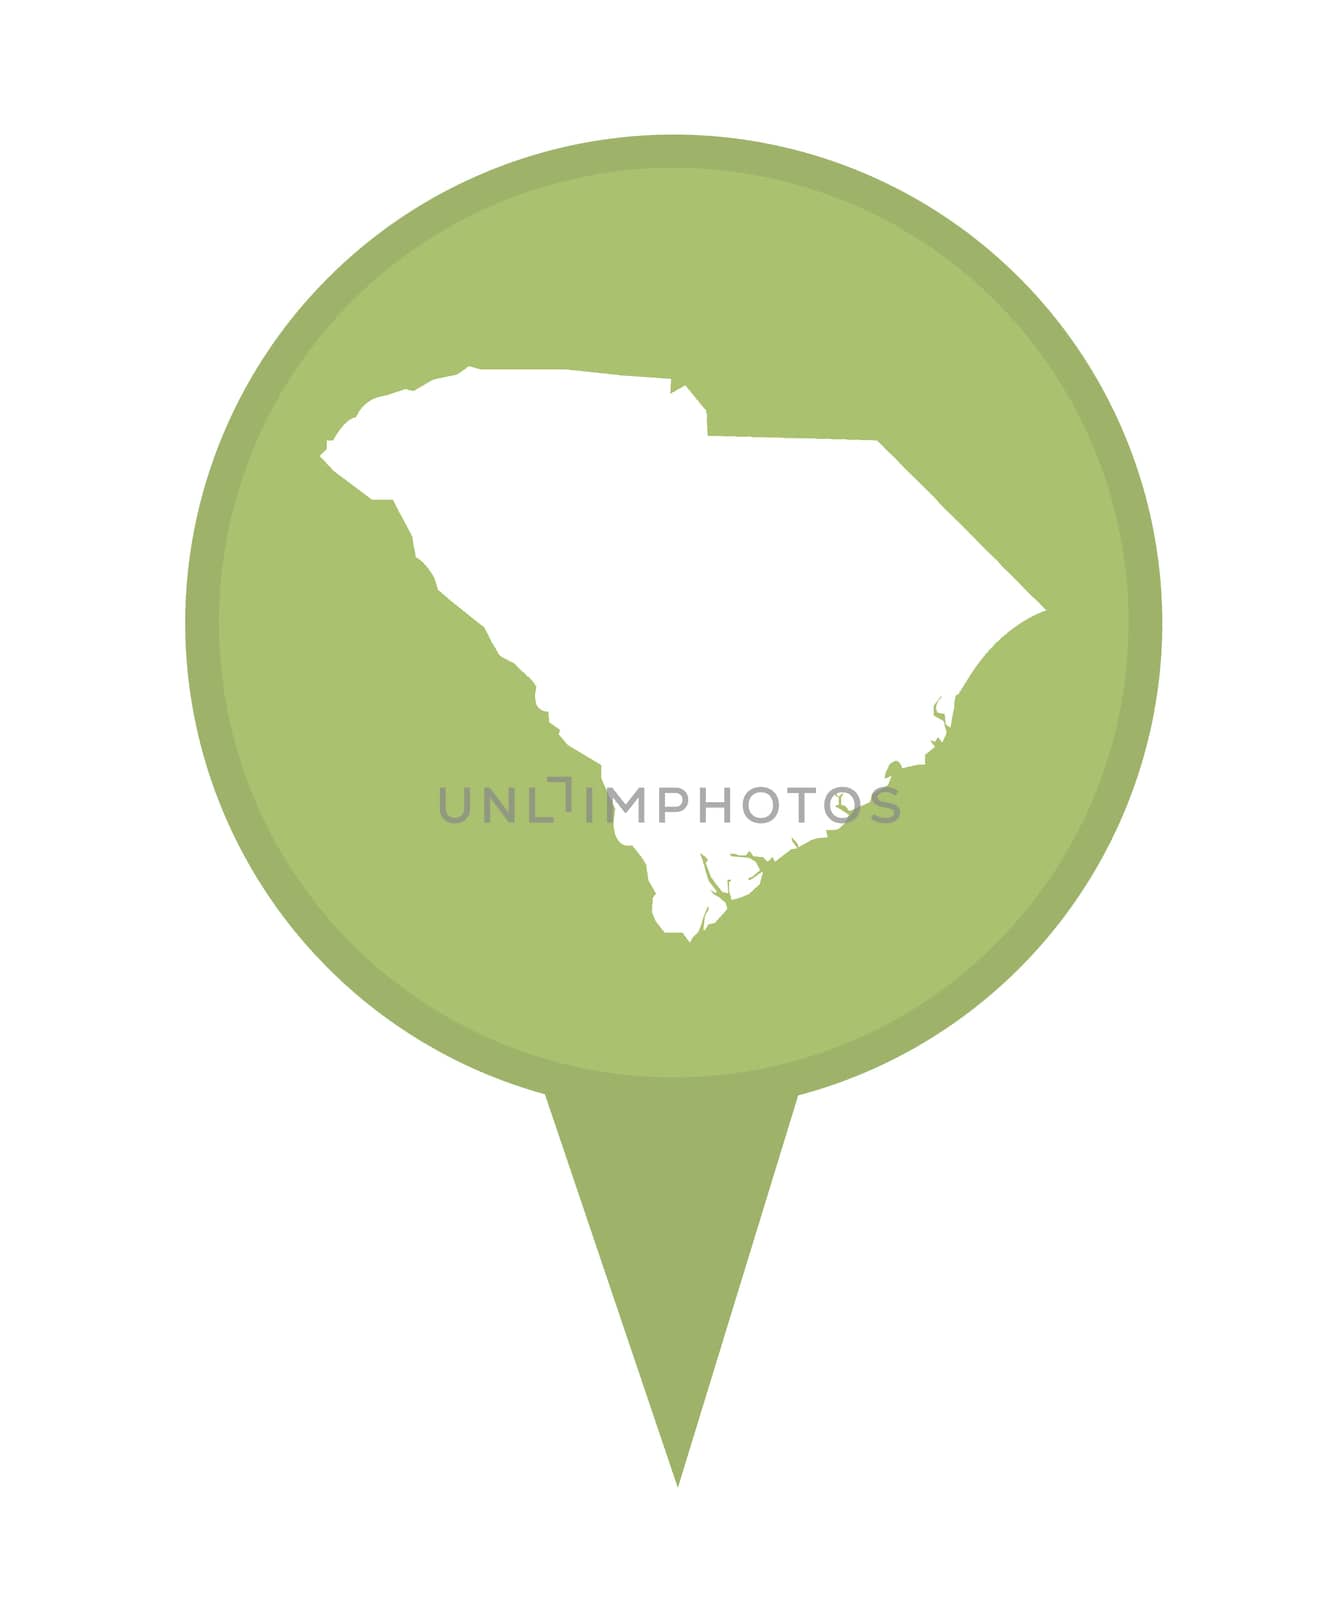 American state of South Carolina marker pin isolated on a white background.